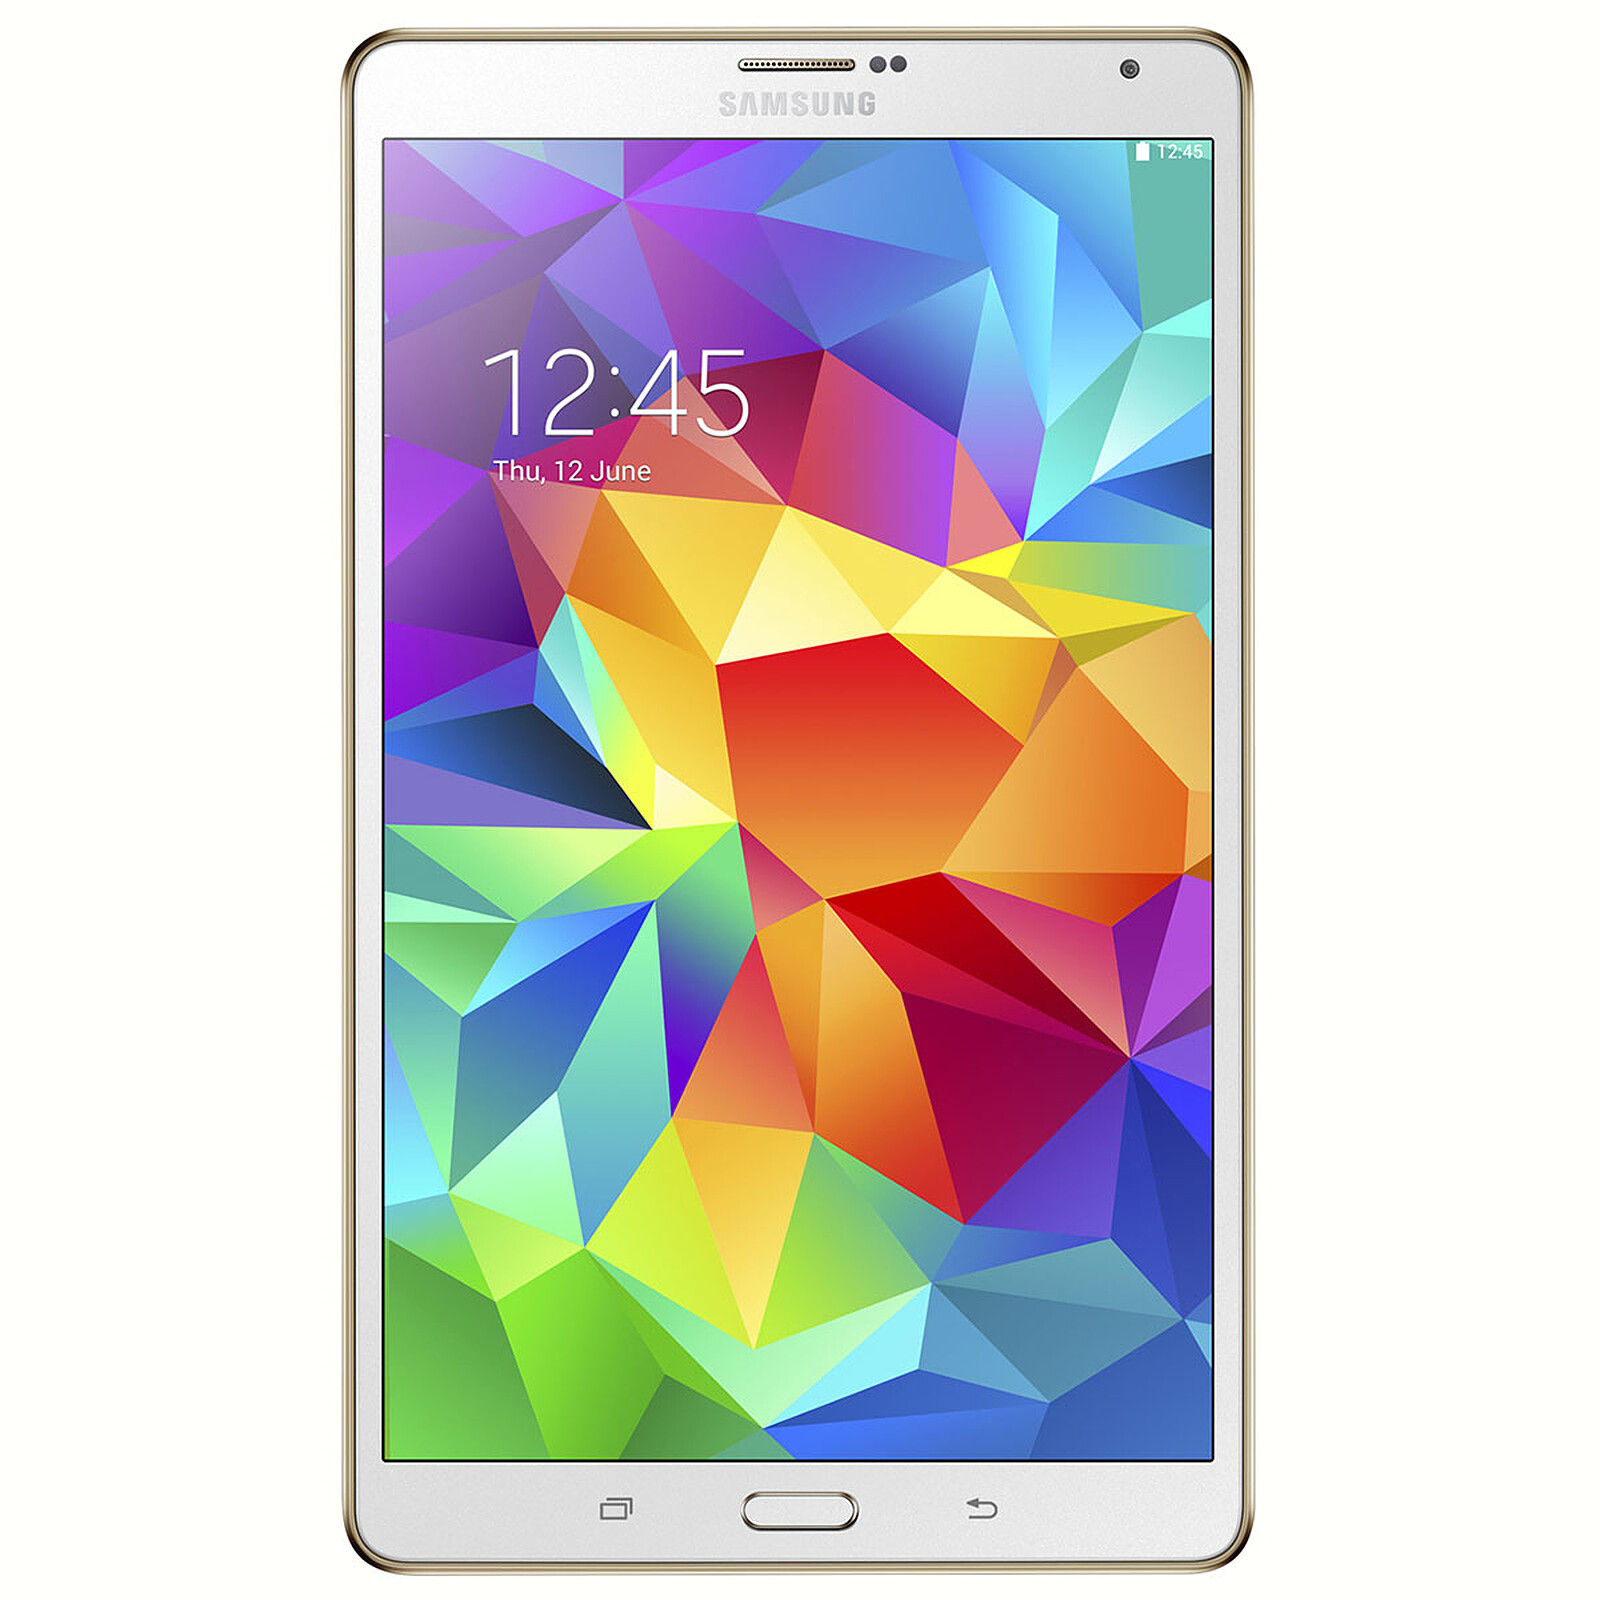 Samsung Galaxy Tab A8 10.5 32 Go Anthracite - Tablette tactile - Garantie  3 ans LDLC